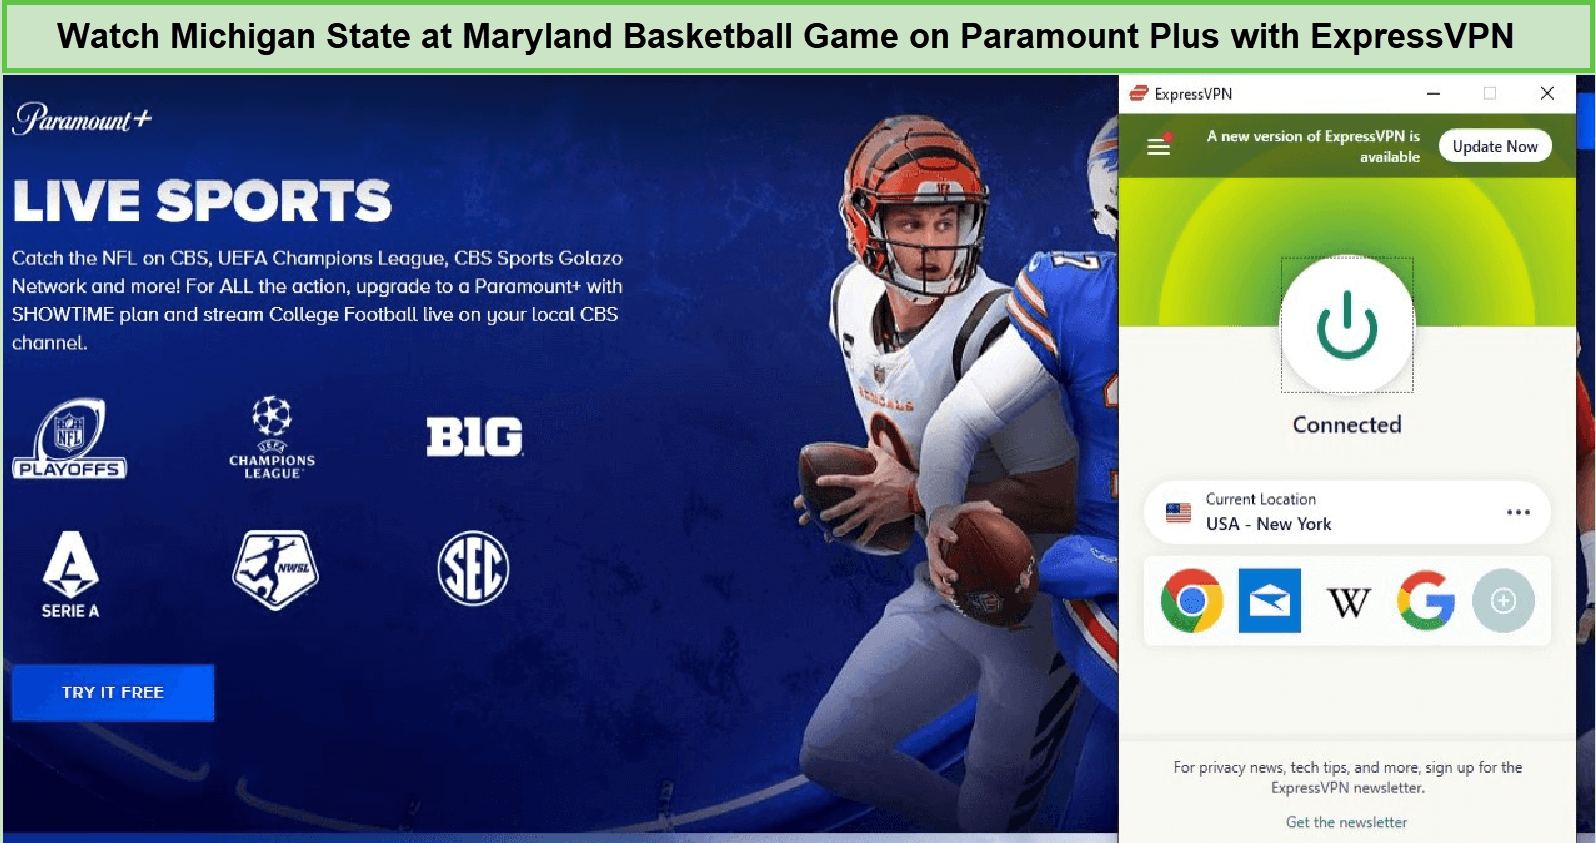 Watch-Michigan-State-at-Maryland-Basketball-Game-in-Singapore-on-Paramount-Plus-with-ExpressVPN